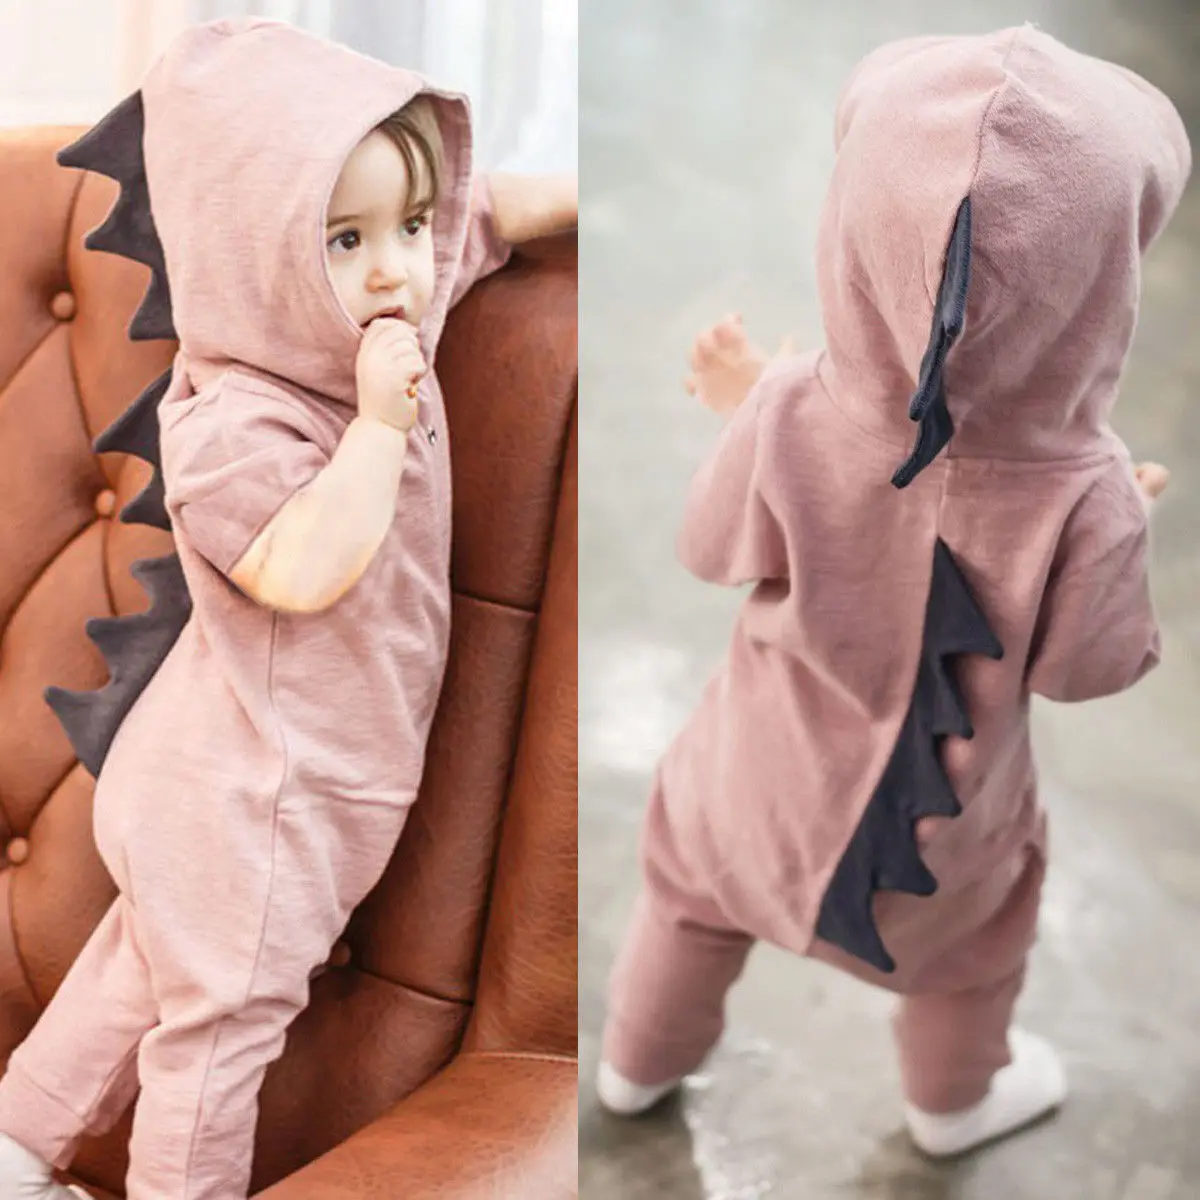 

2019 New Fashion Newborn Infant Baby Girl Dinosaur Romper Jumpsuit Playsuit Cute Clothes Outfit 0-18M